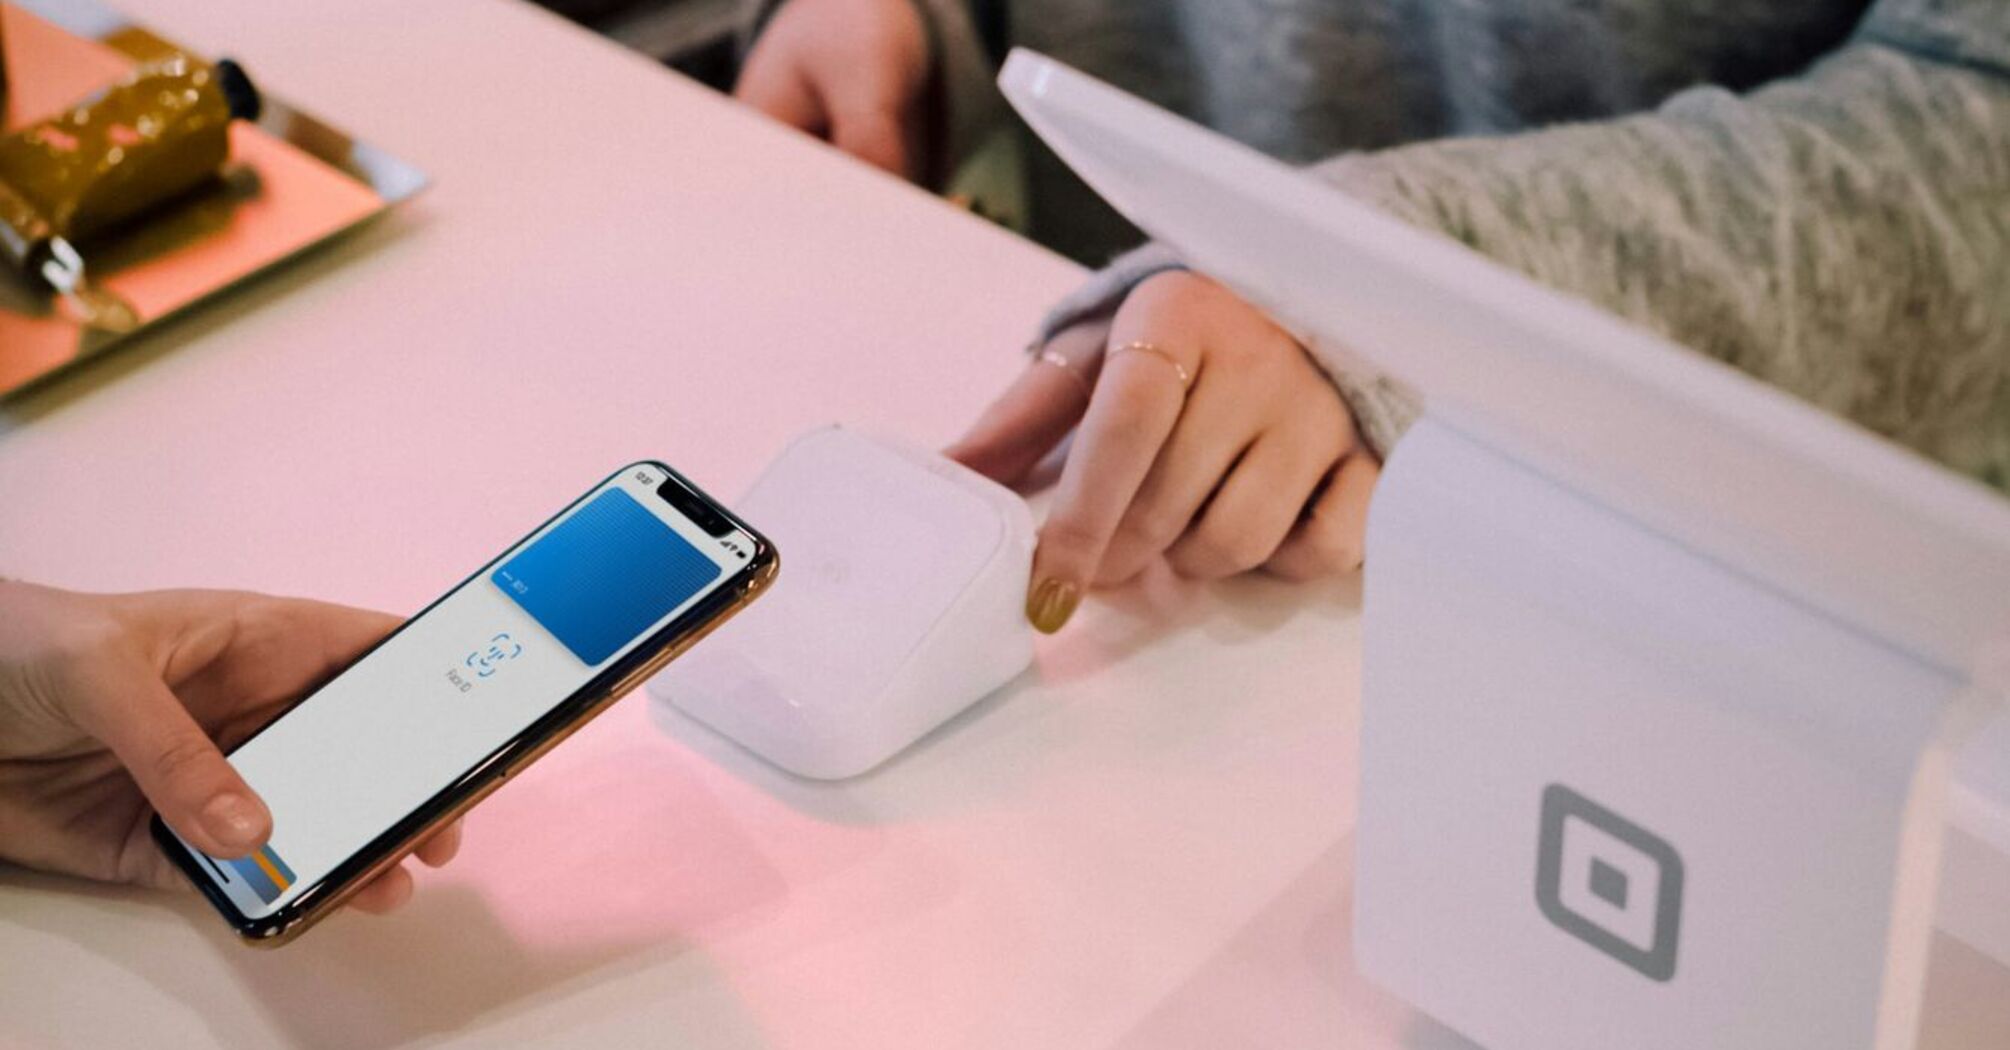 A customer is making a contactless payment using Apple Pay with their smartphone at a modern payment terminal